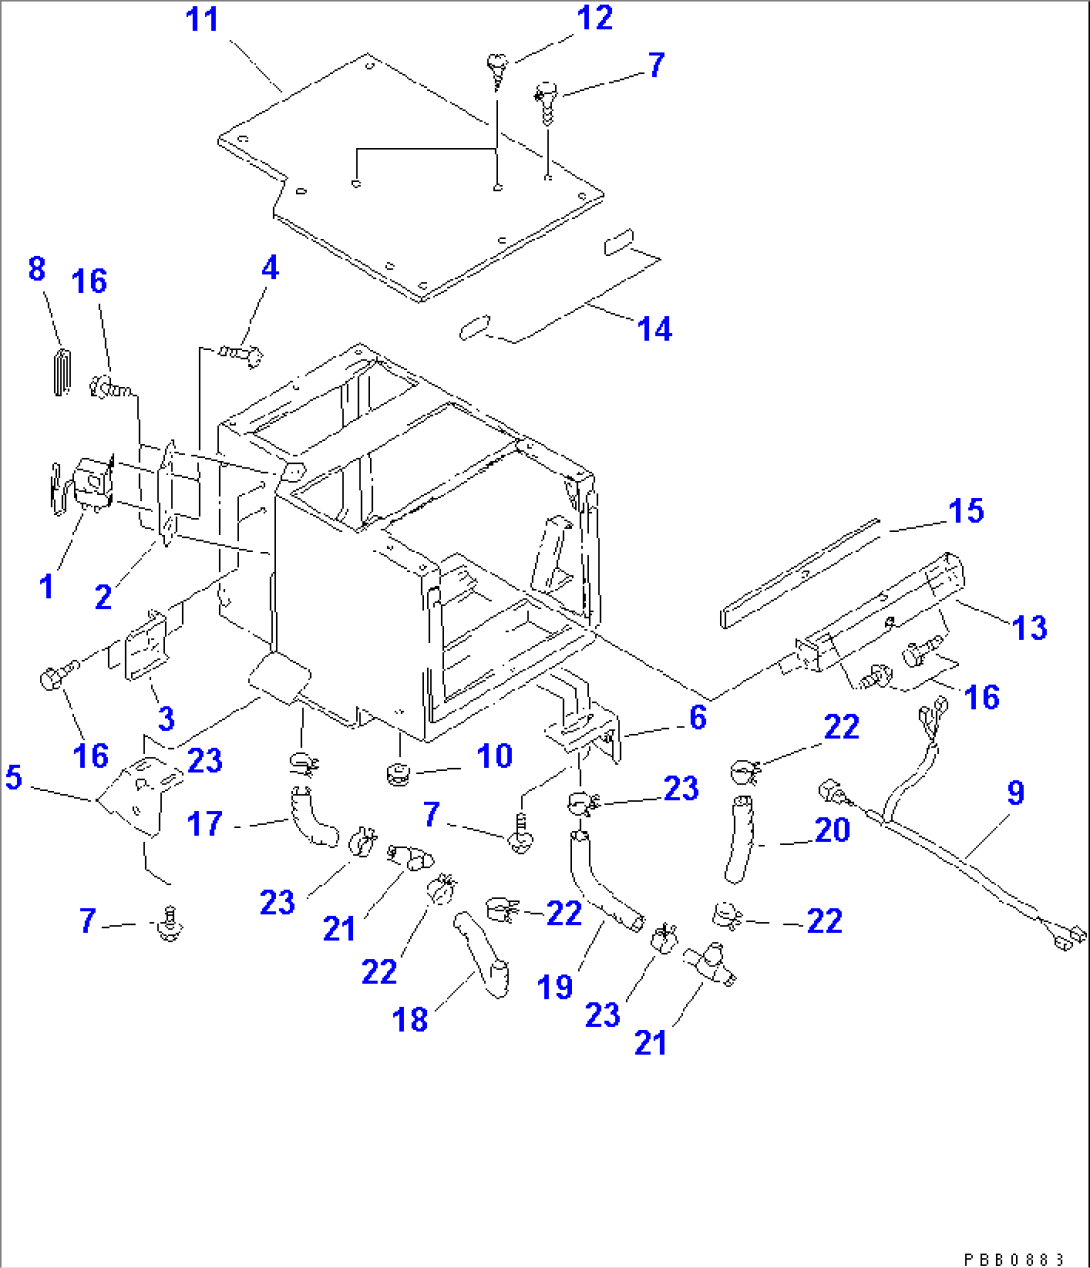 AIR CONDITIONER UNIT (THERMOSTAT AND DRAIN HOSE)